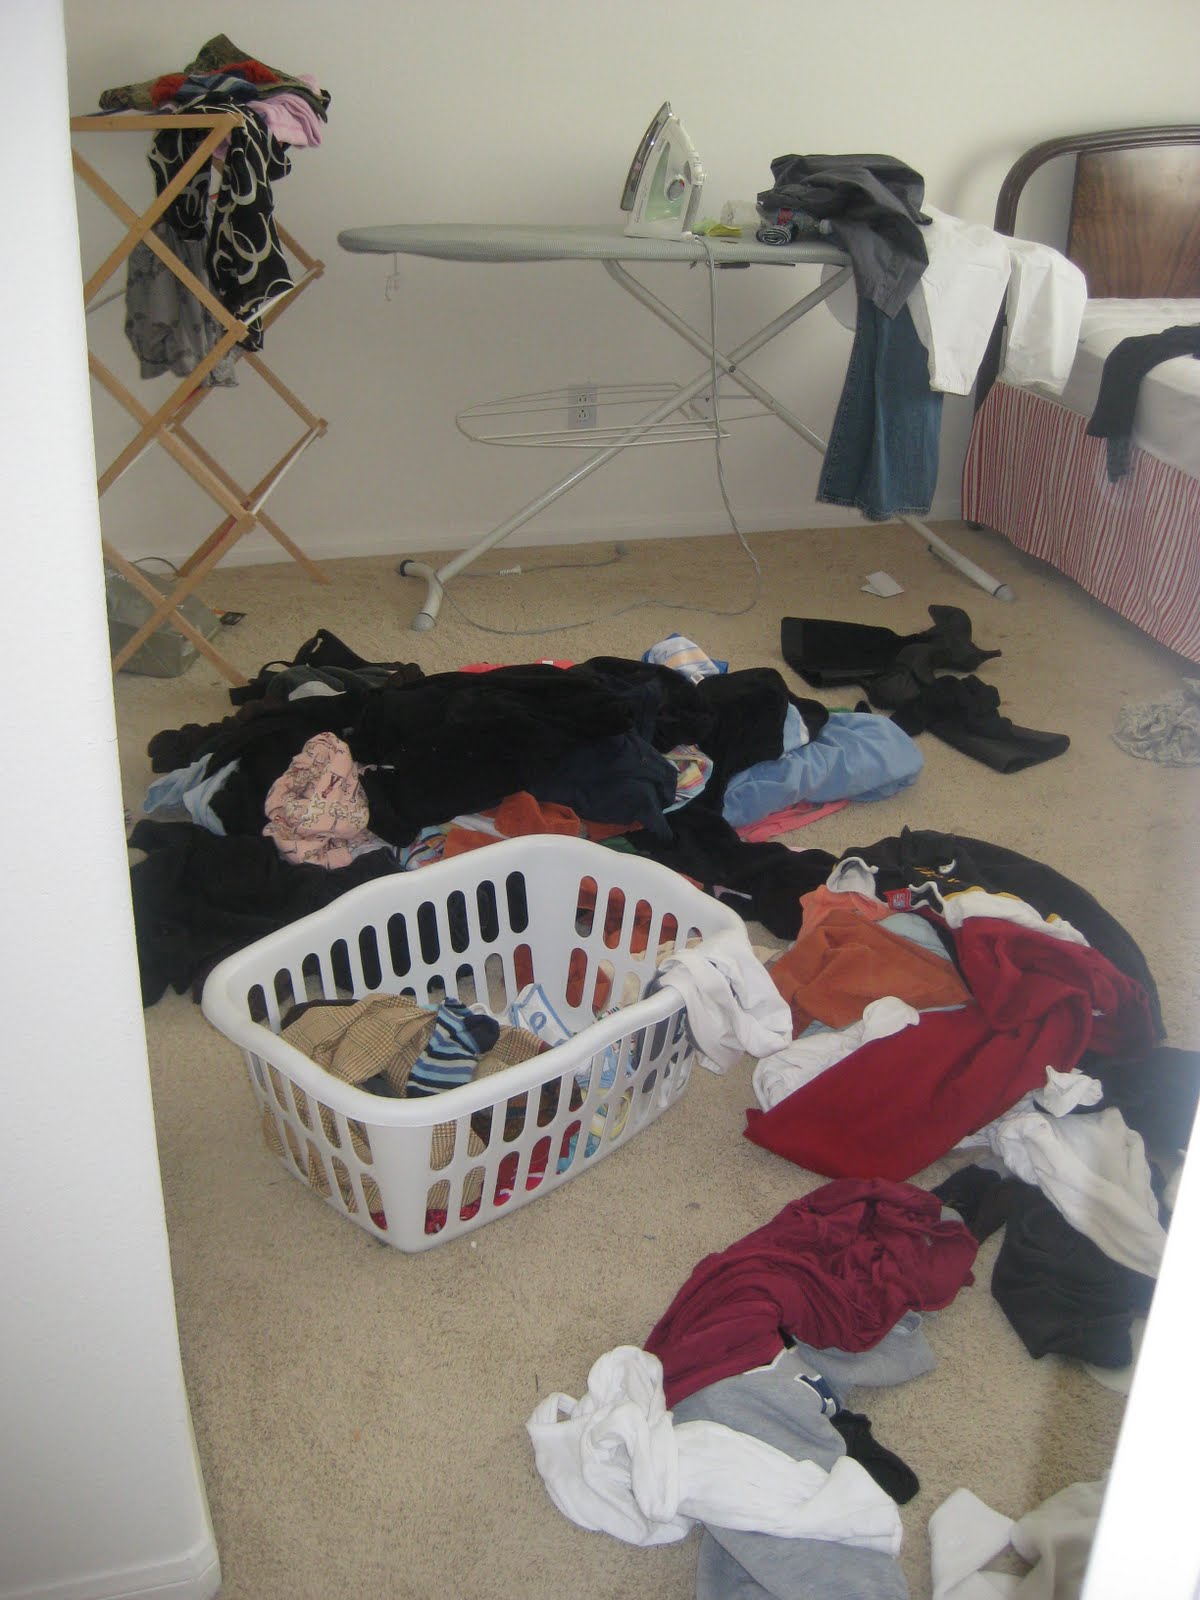 Our 10 Things: Airing My Dirty Laundry